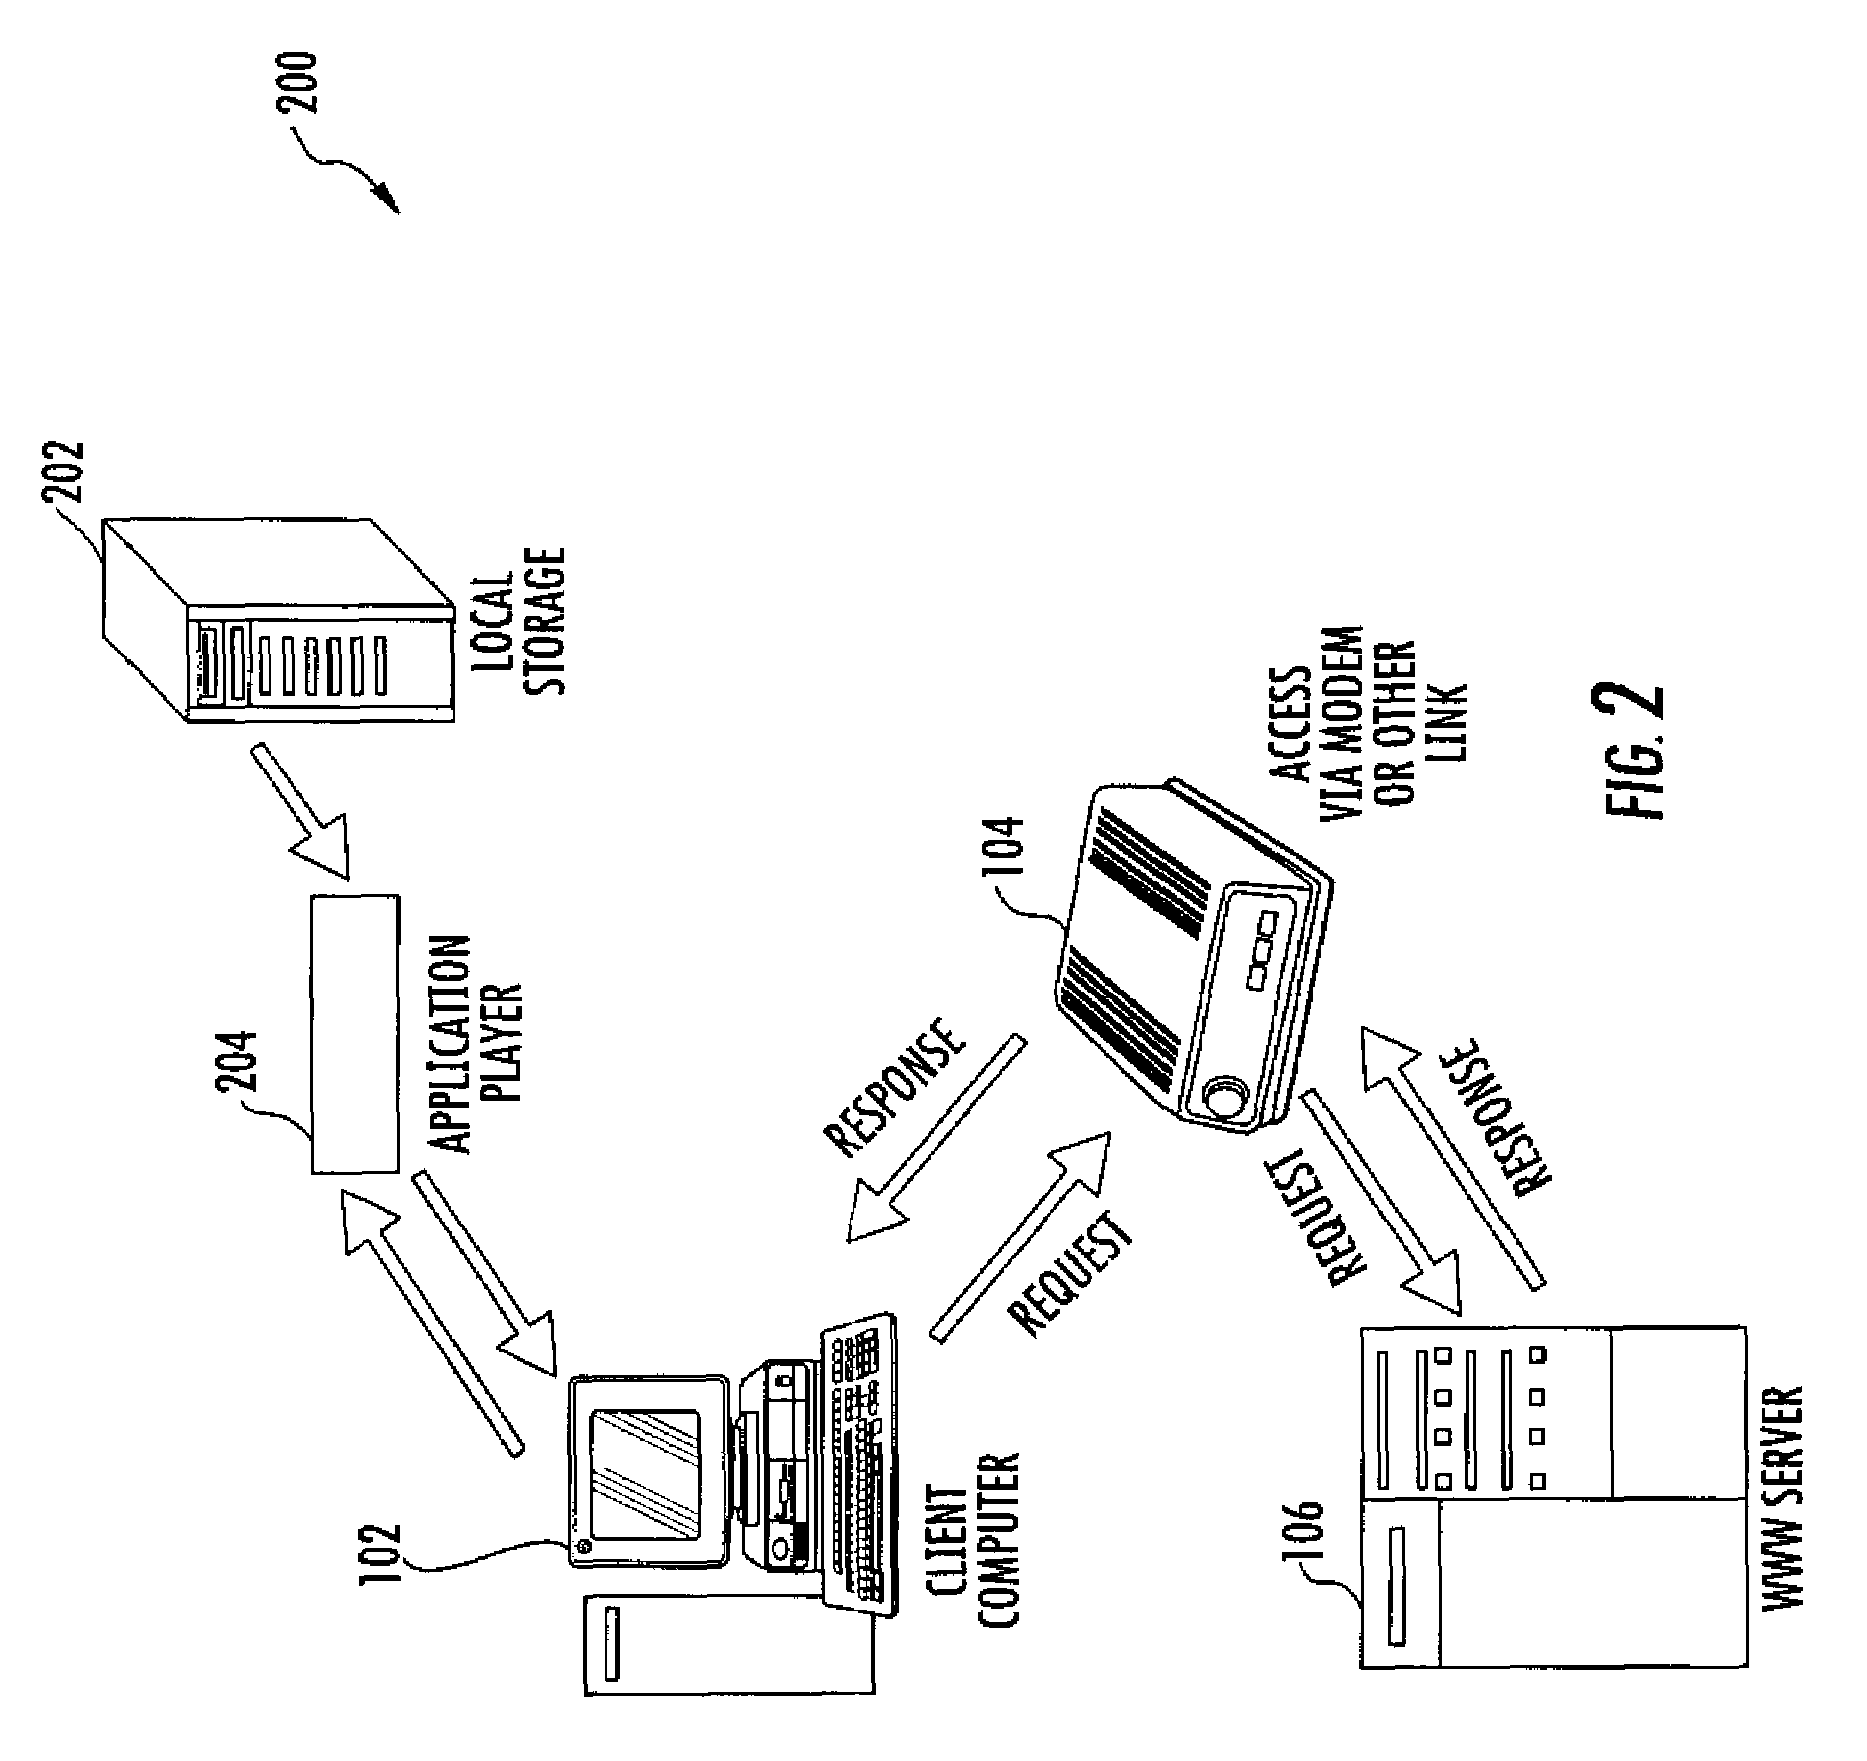 System and method for providing access to digital goods over communications networks